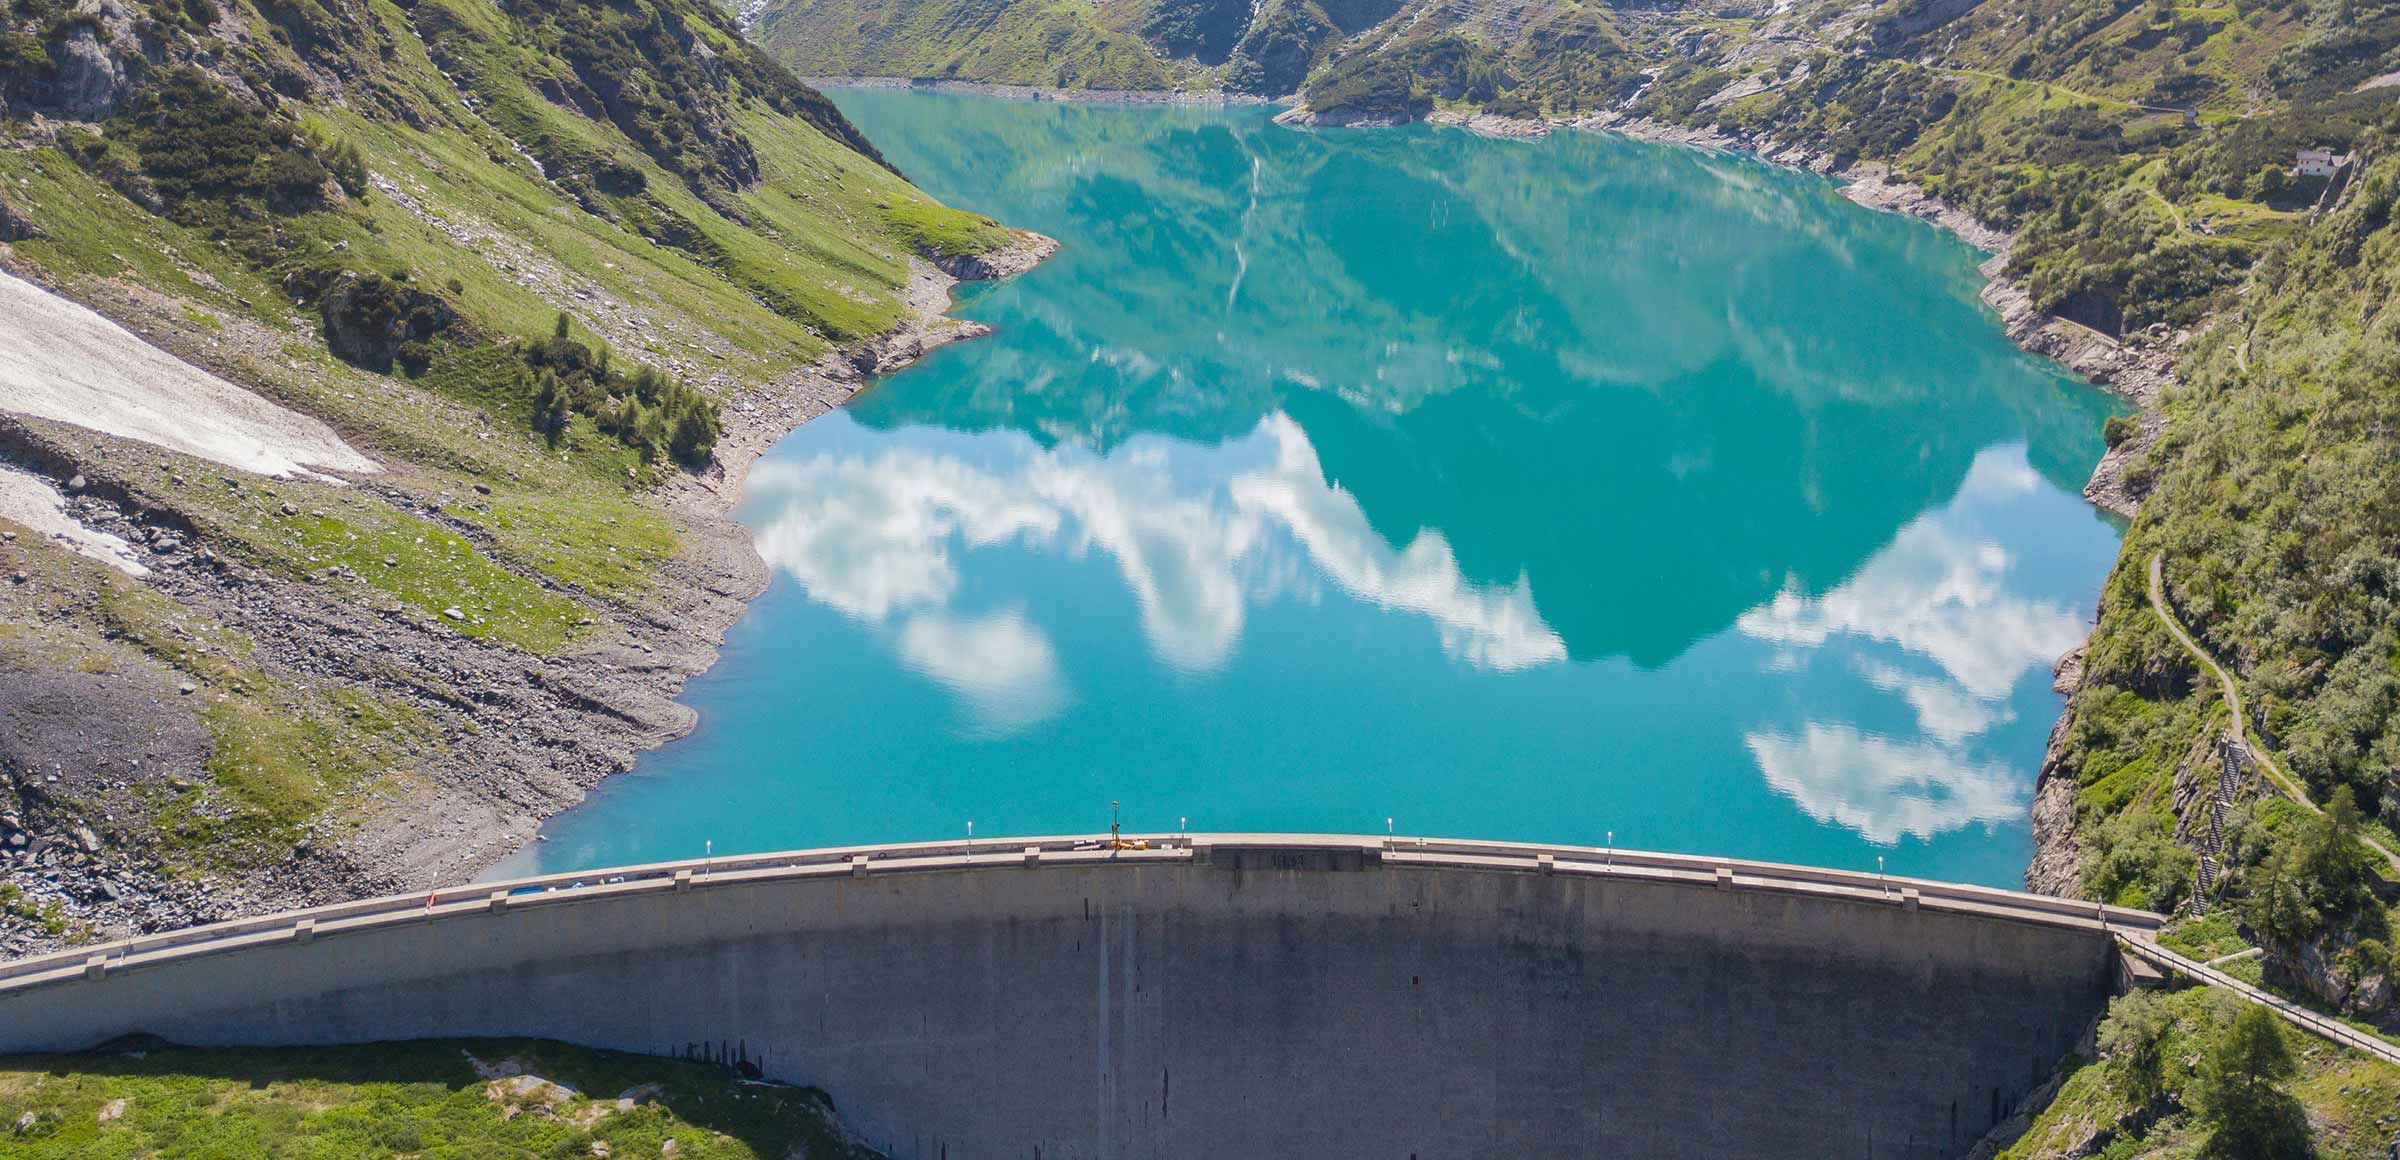 The Giro dell\u2019Acqua: harnessing the power of young people and sports to make hydroelectric power even more sustainable